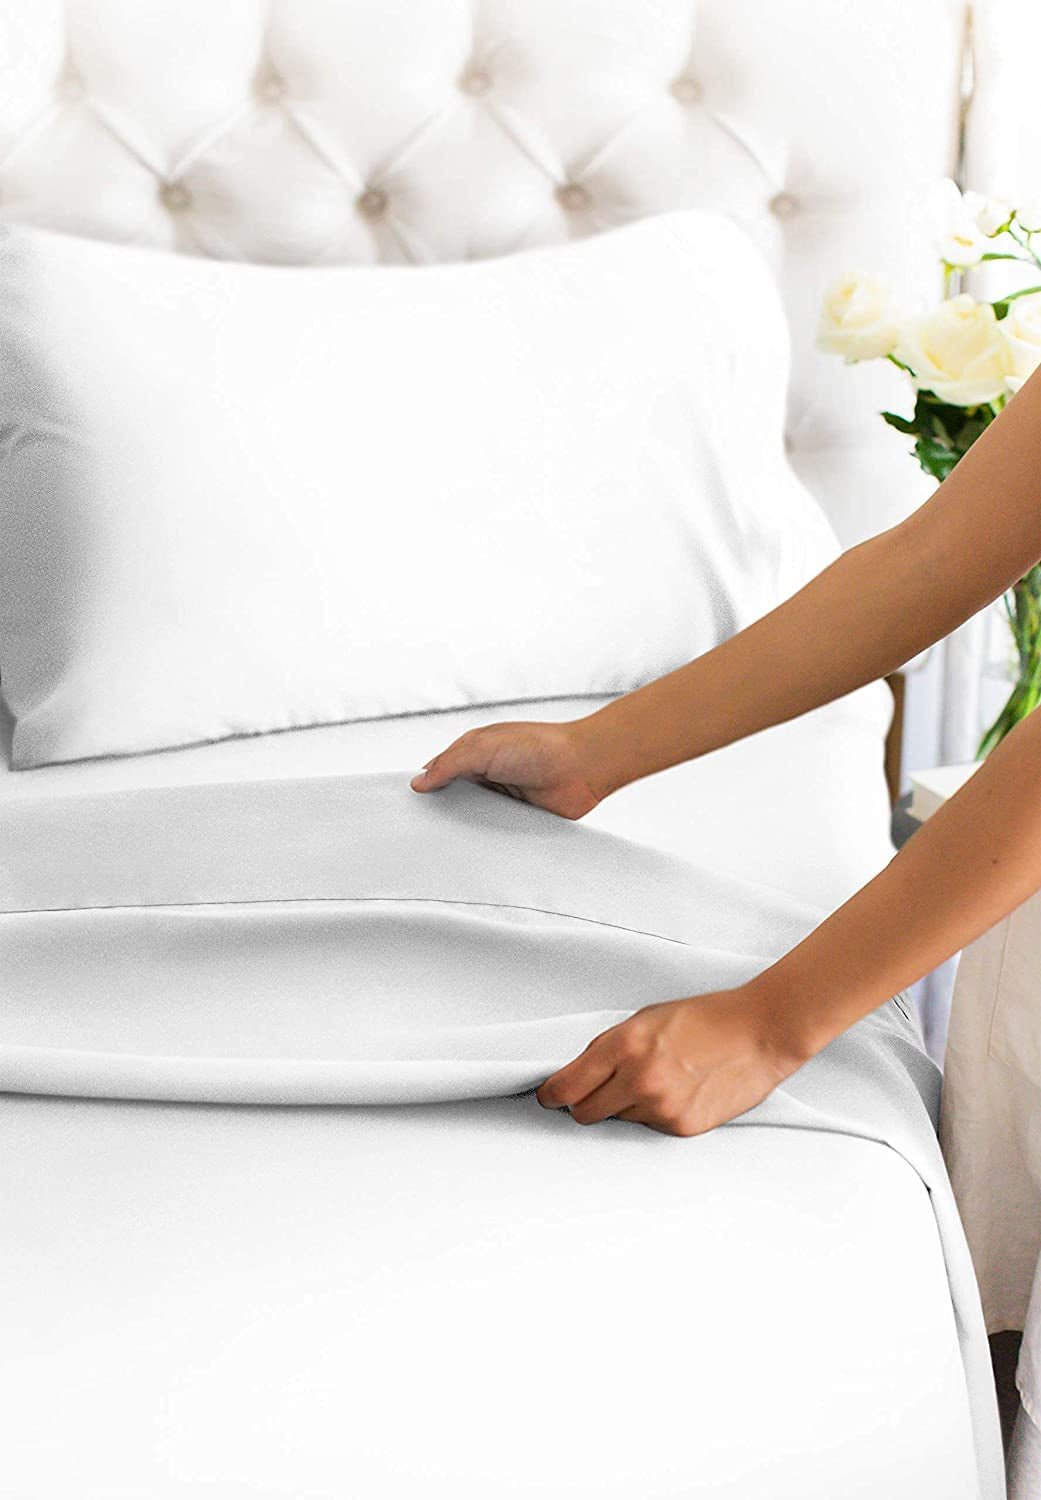 Twin Size Cooling Sheets - Breathable, Soft, and Wrinkle-Free